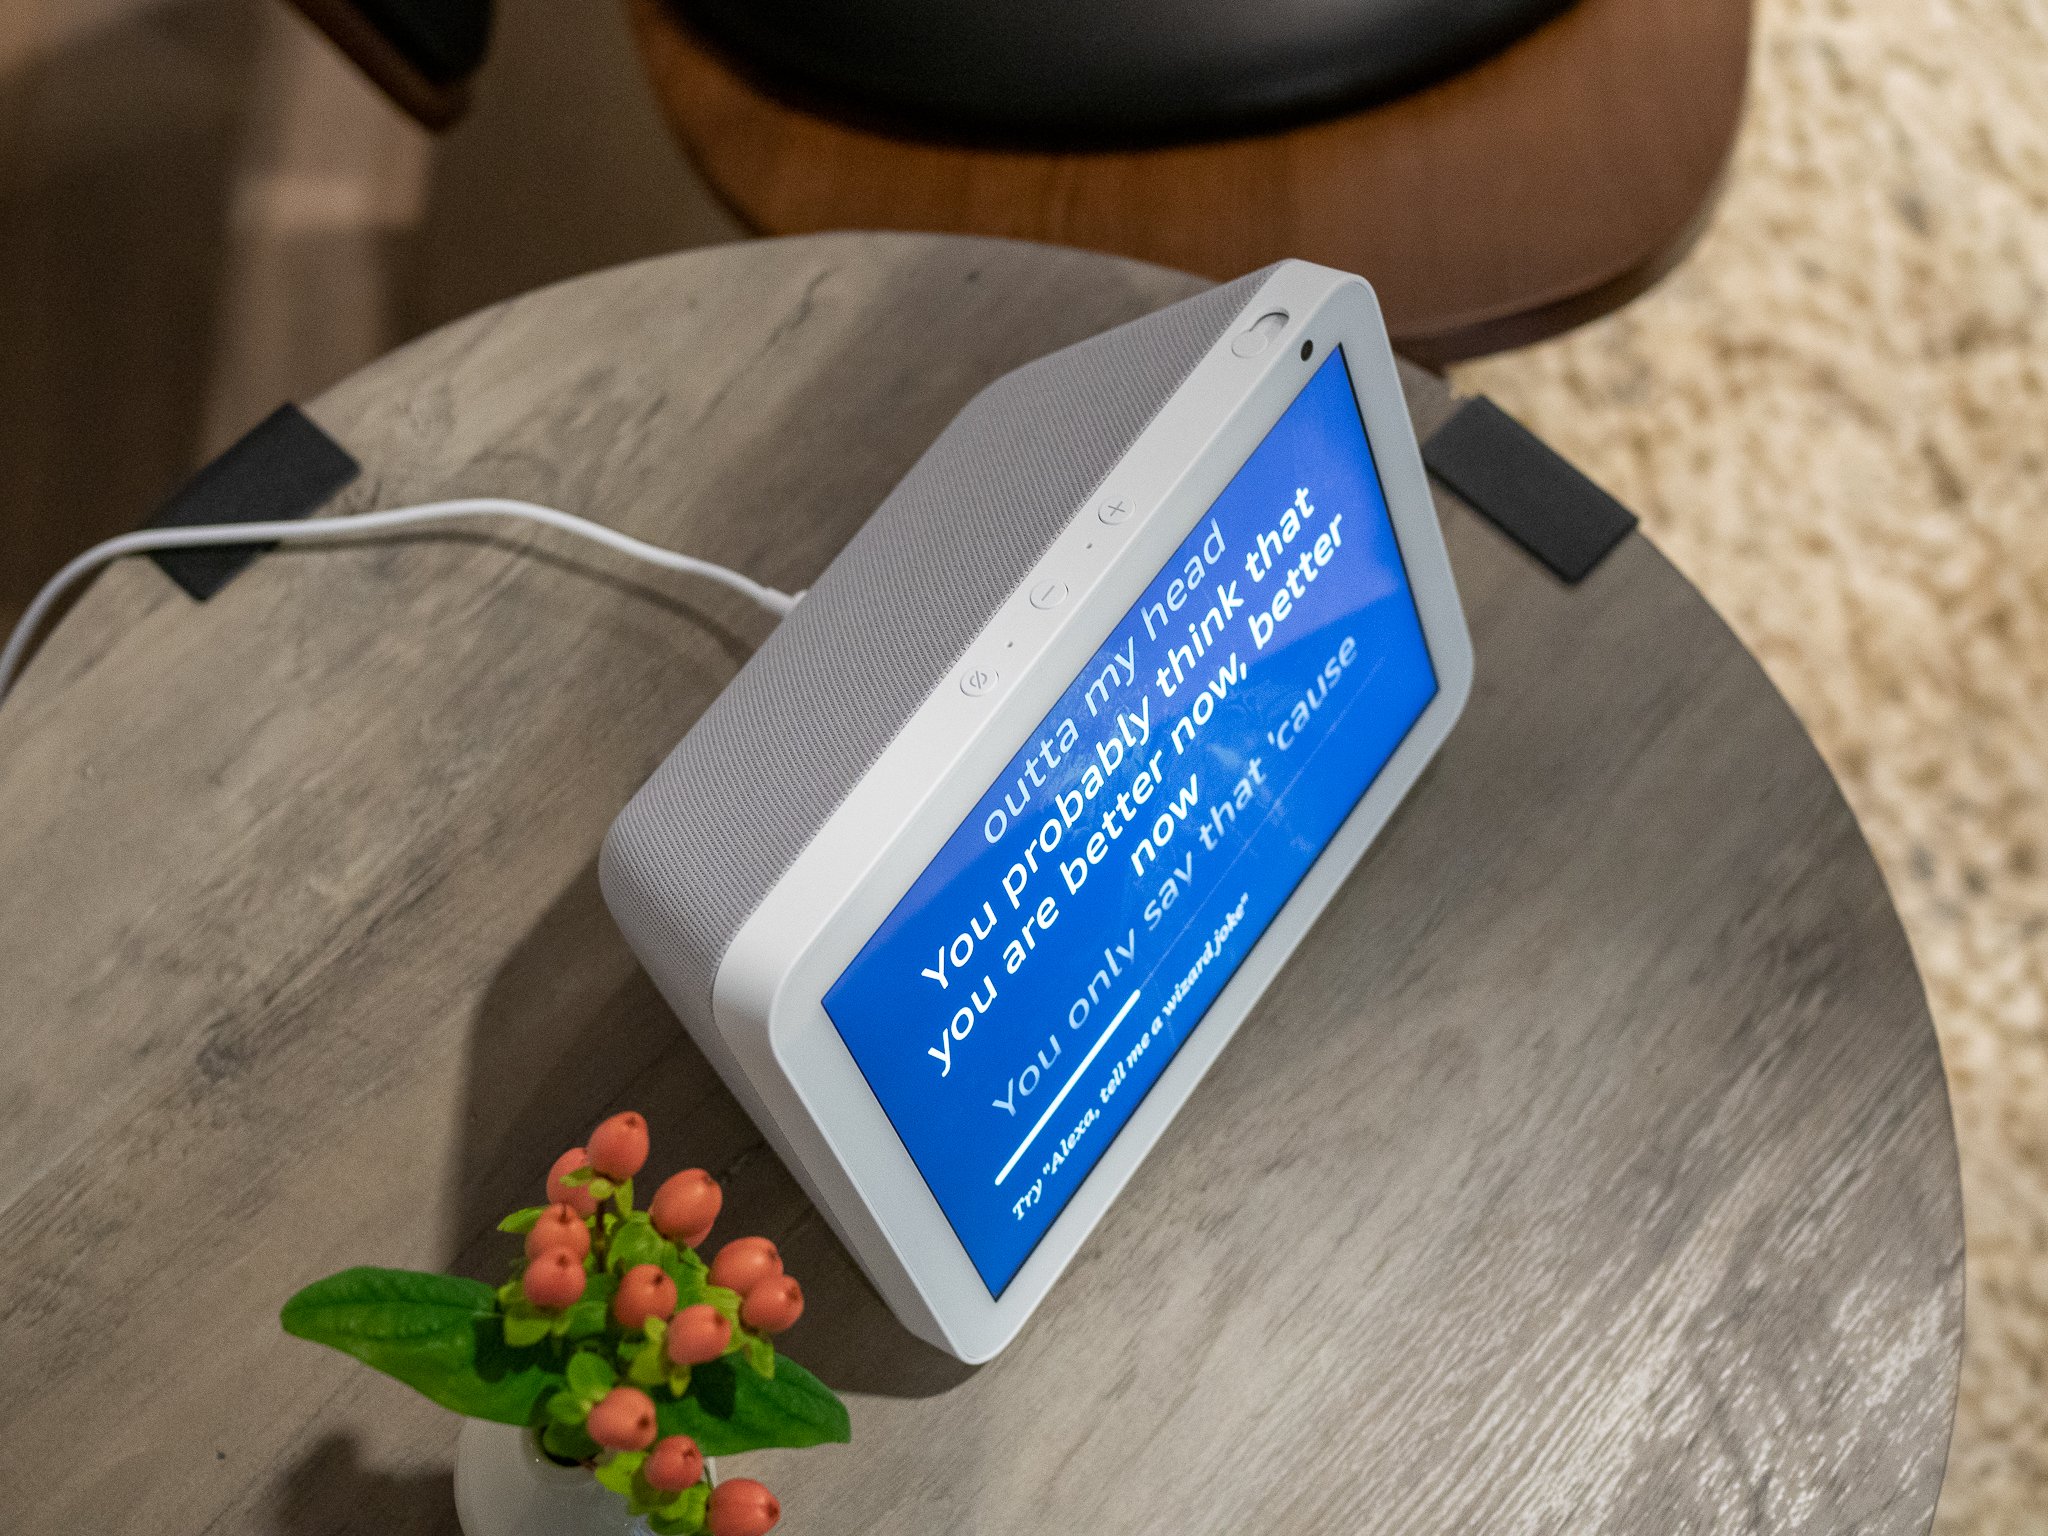 Have a new Amazon Echo Show? Here is how to get it up and running.